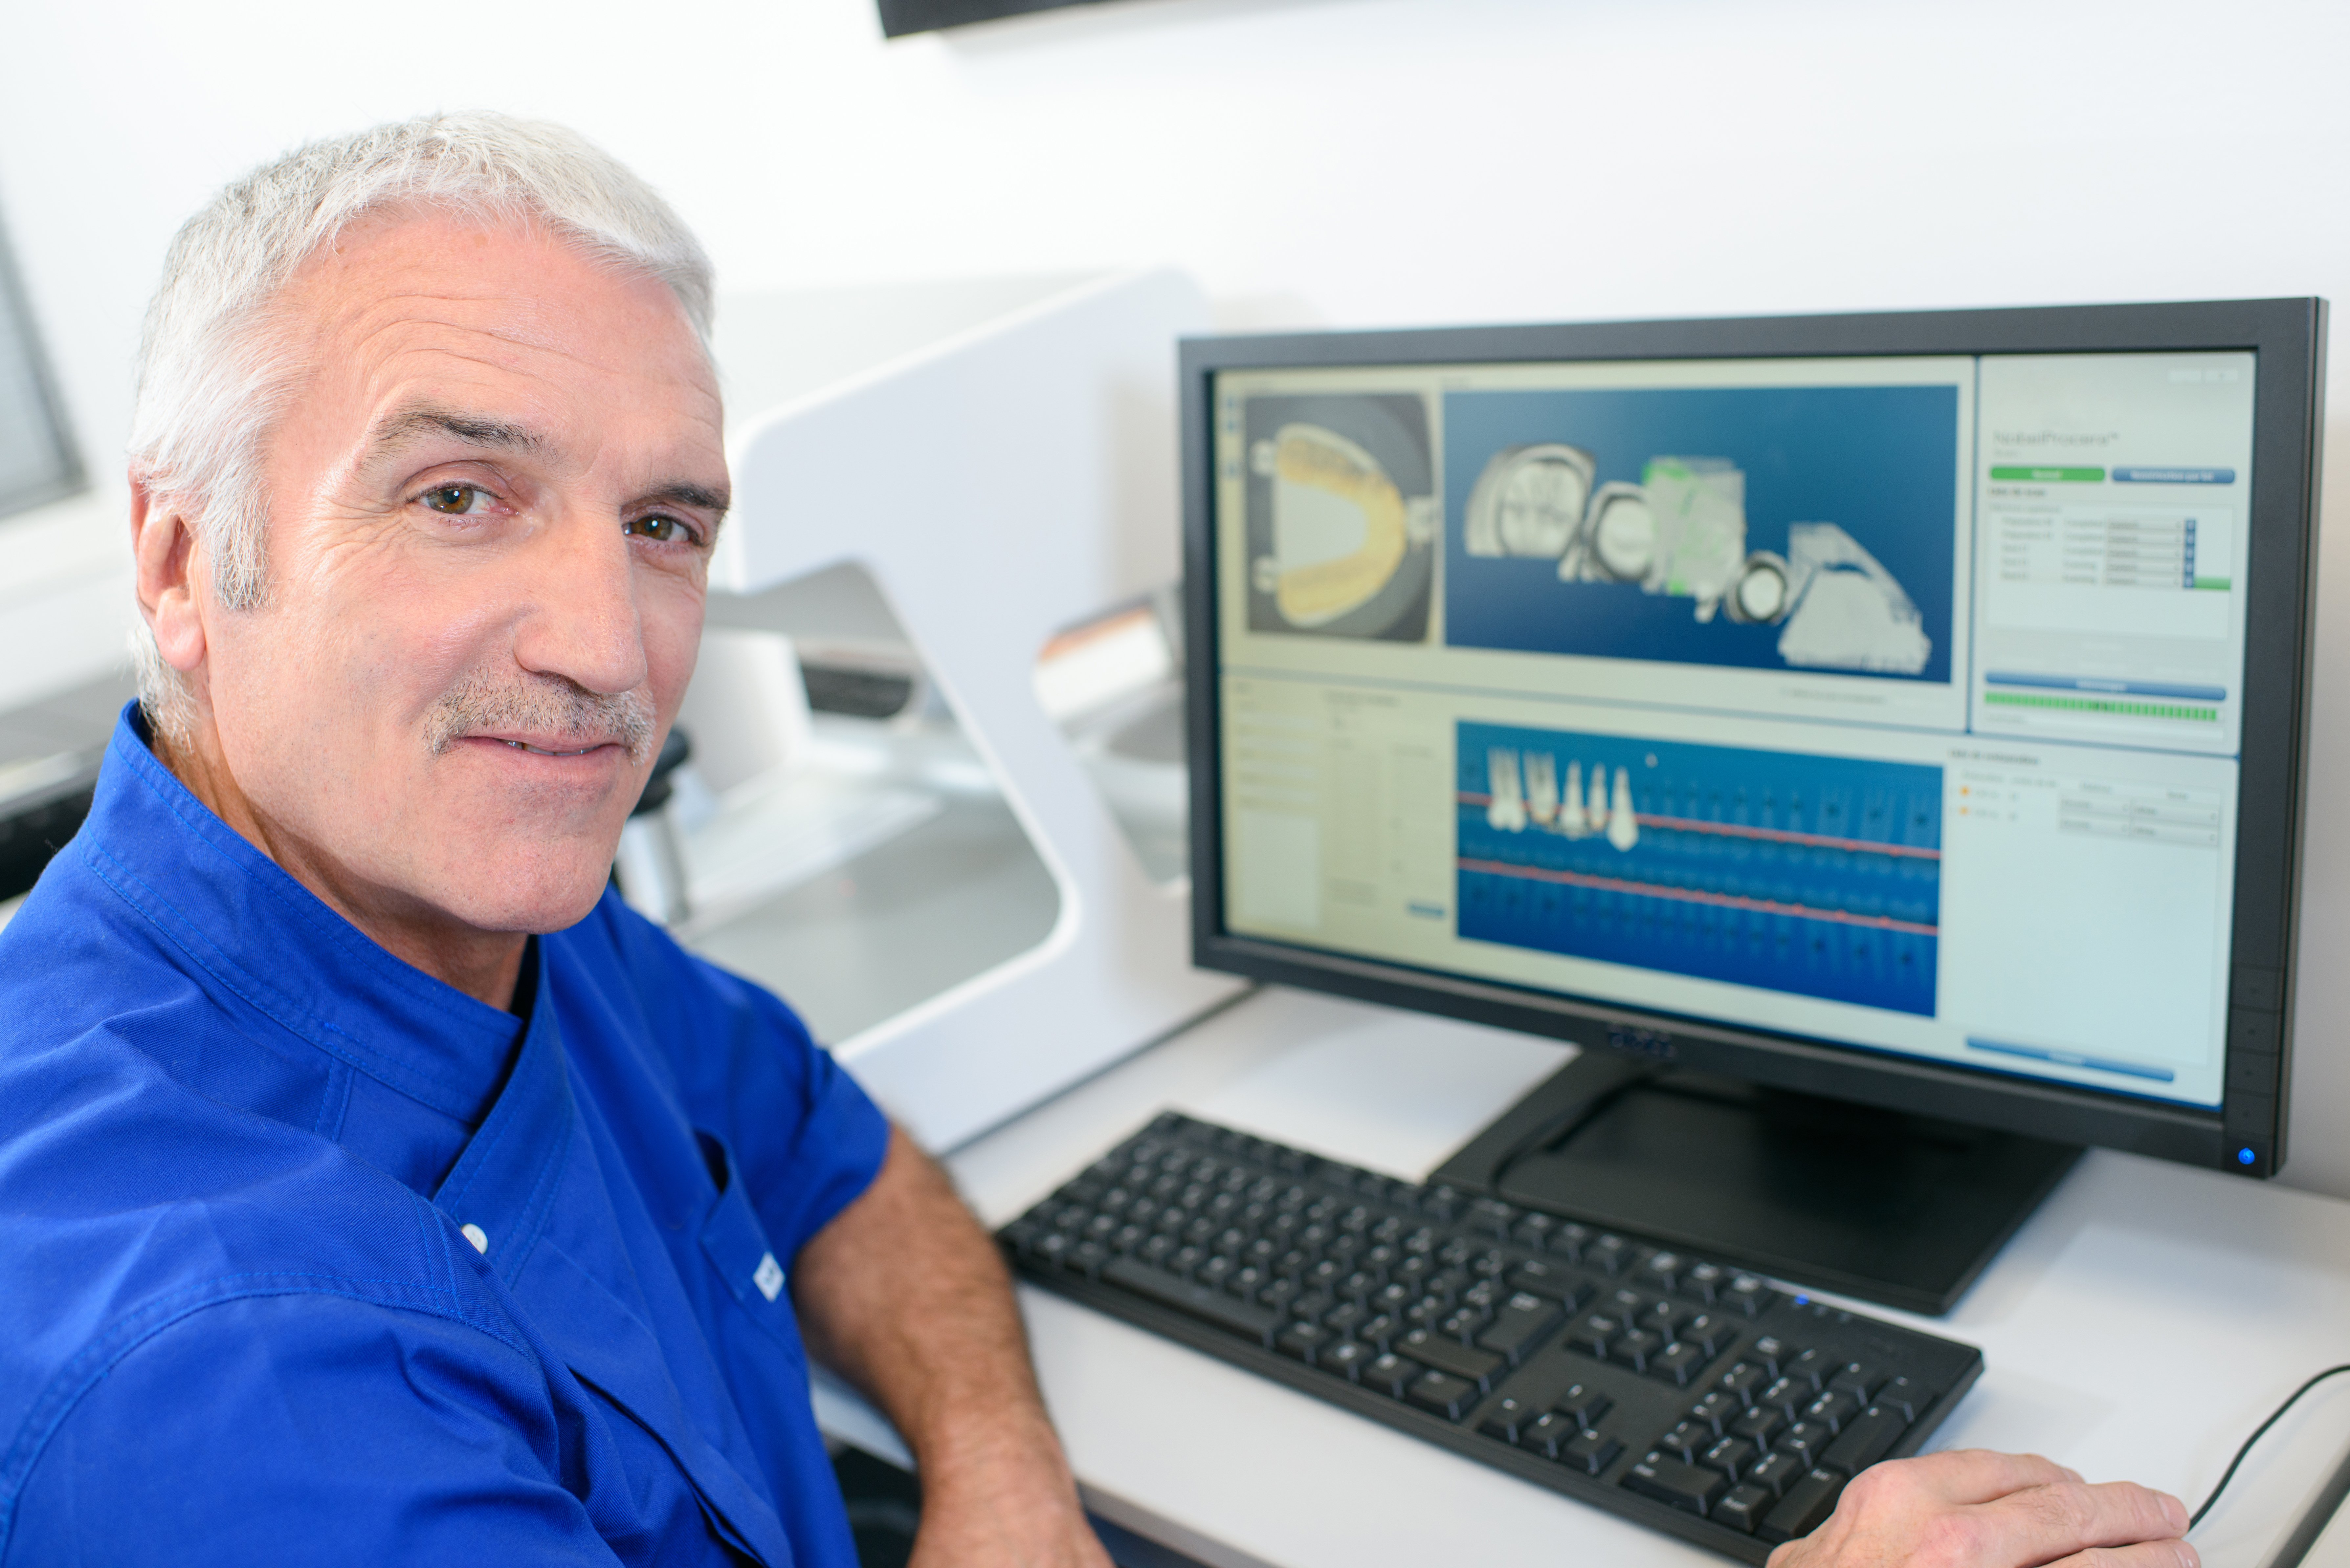 Dentist sitting in front of his computer | Photo: Shutterstock